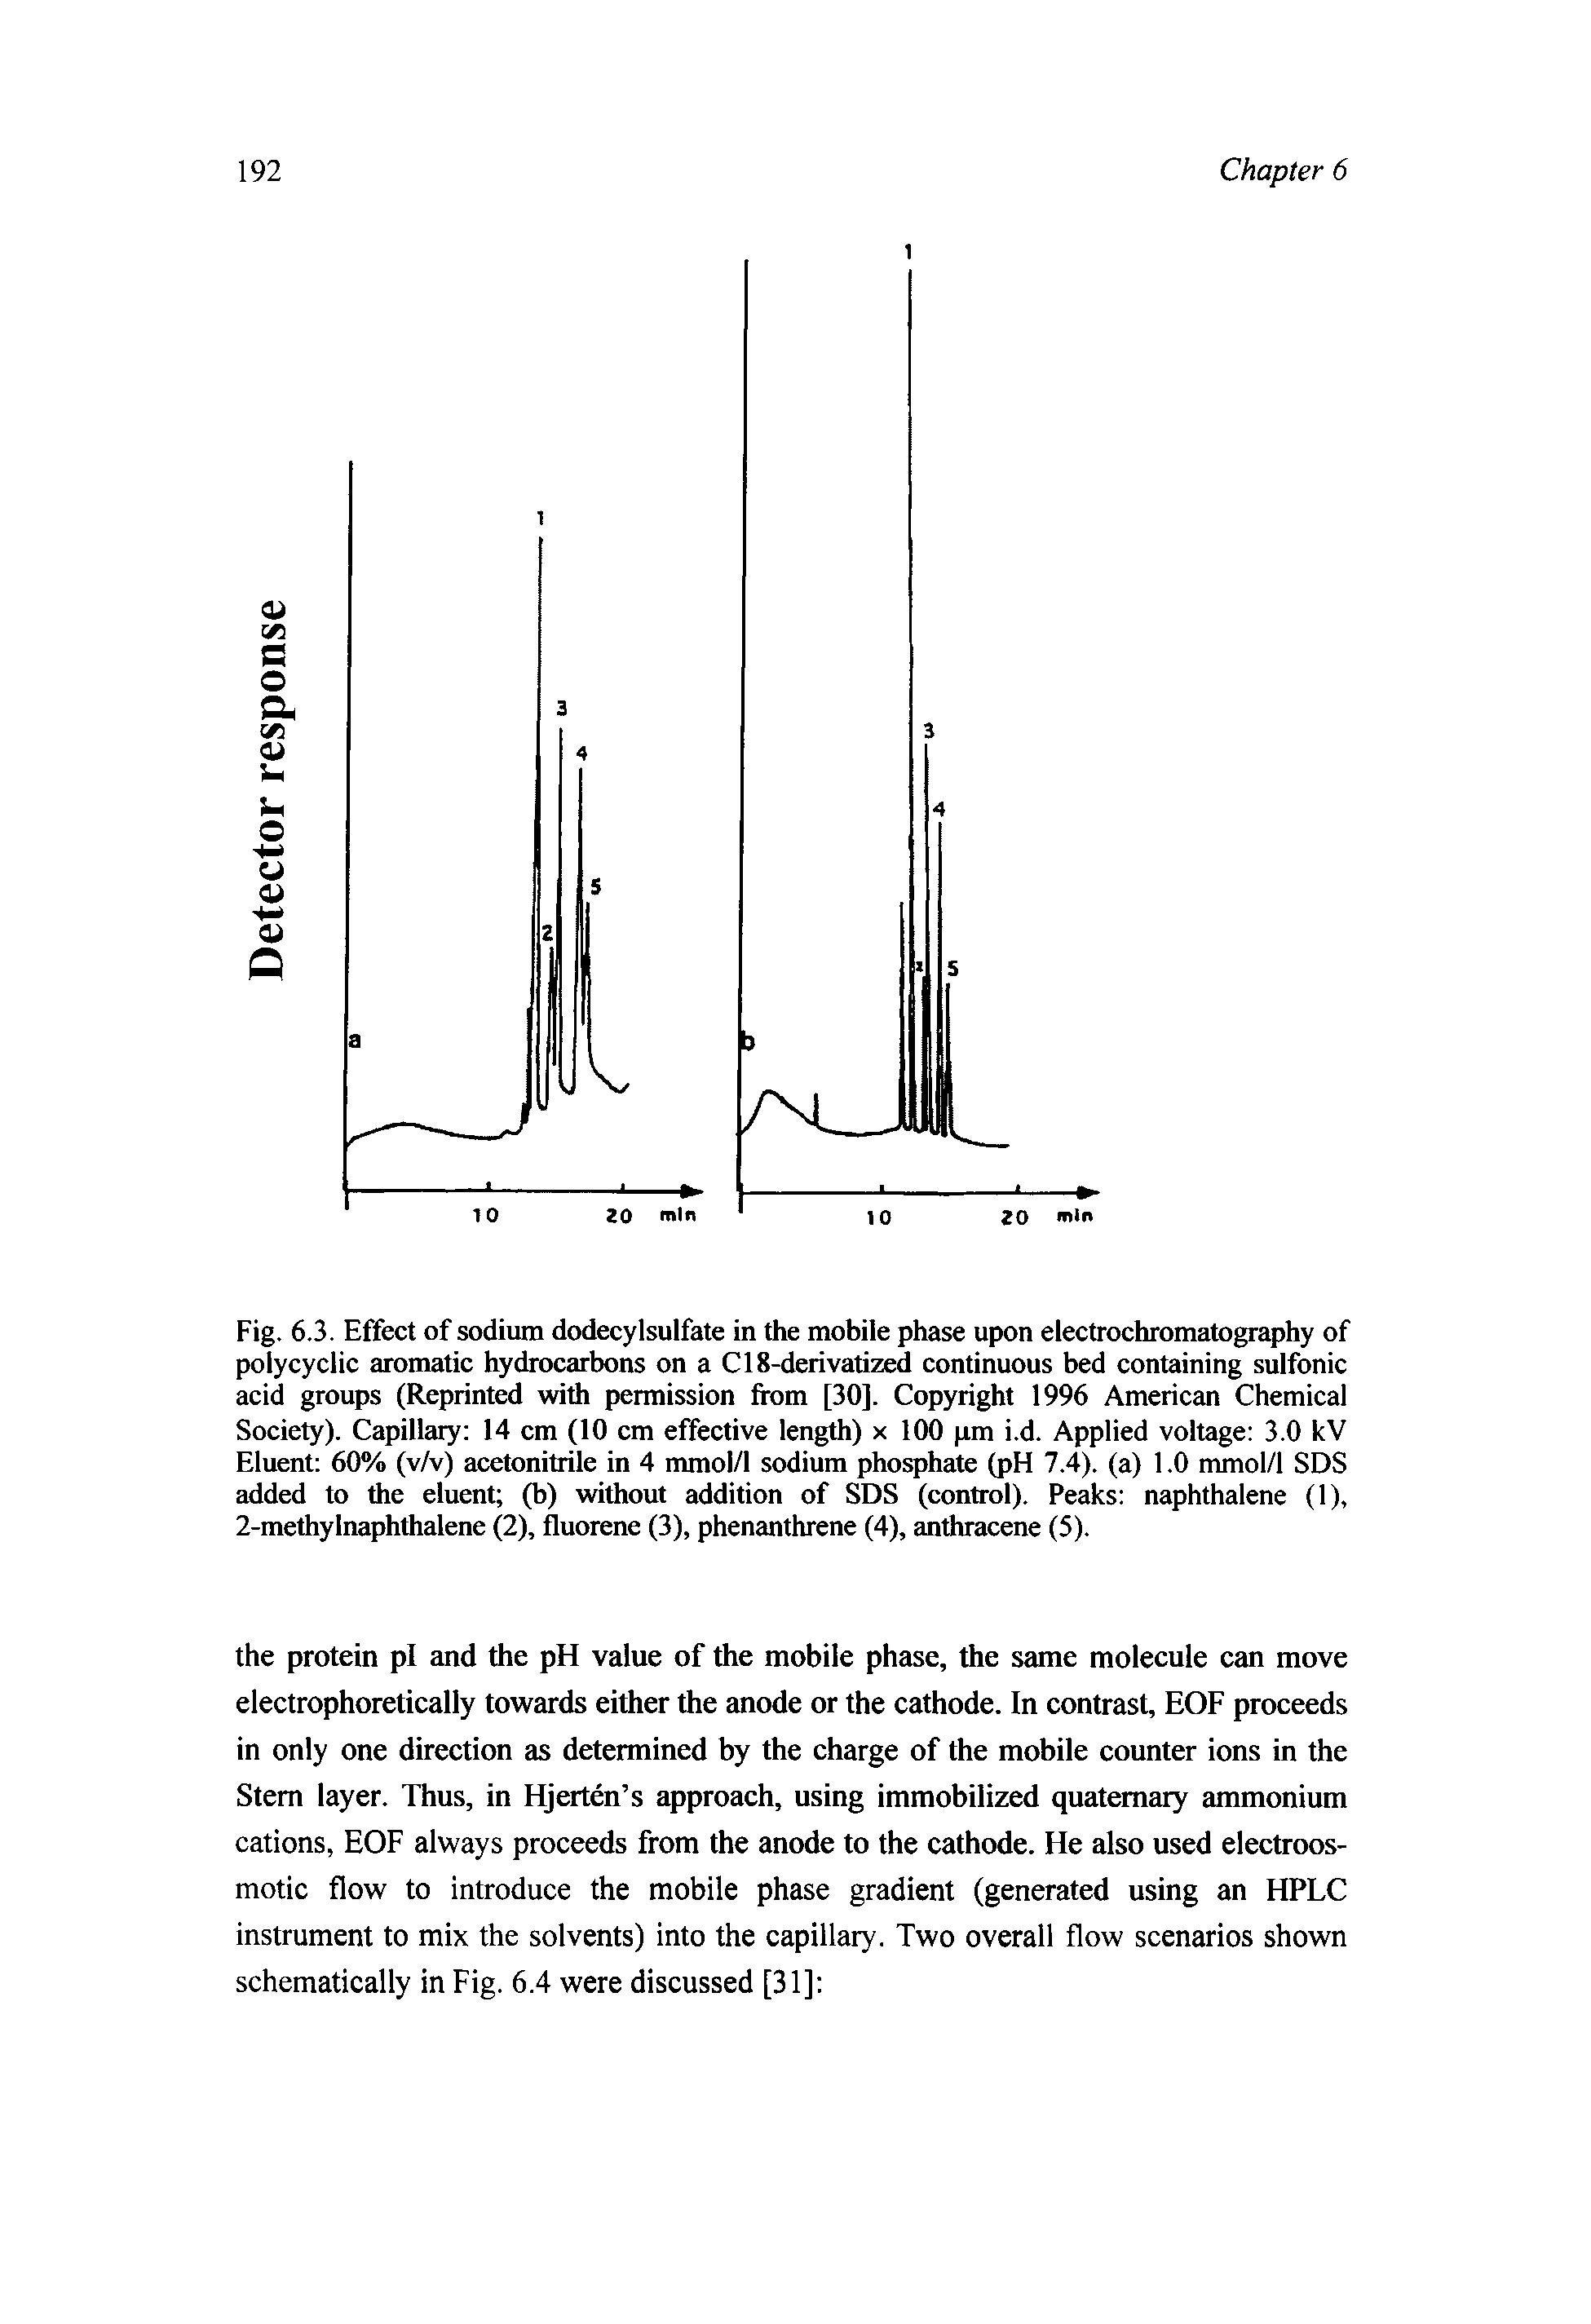 Fig. 6.3. Effect of sodium dodecylsulfate in the mobile phase upon electrochromatography of polycyclic aromatic hydrocarbons on a C18-derivatized continuous bed containing sulfonic acid groups (Reprinted with permission from [30]. Copyright 1996 American Chemical Society). Capillary 14 cm (10 cm effective length) x 100 pm i.d. Applied voltage 3.0 kV Eluent 60% (v/v) acetonitrile in 4 mmol/1 sodium phosphate (pH 7.4). (a) 1.0 mmol/1 SDS added to the eluent (b) without addition of SDS (control). Peaks naphthalene (1), 2-methylnaphthalene (2), fluorene (3), phenanthrene (4), anthracene (5).